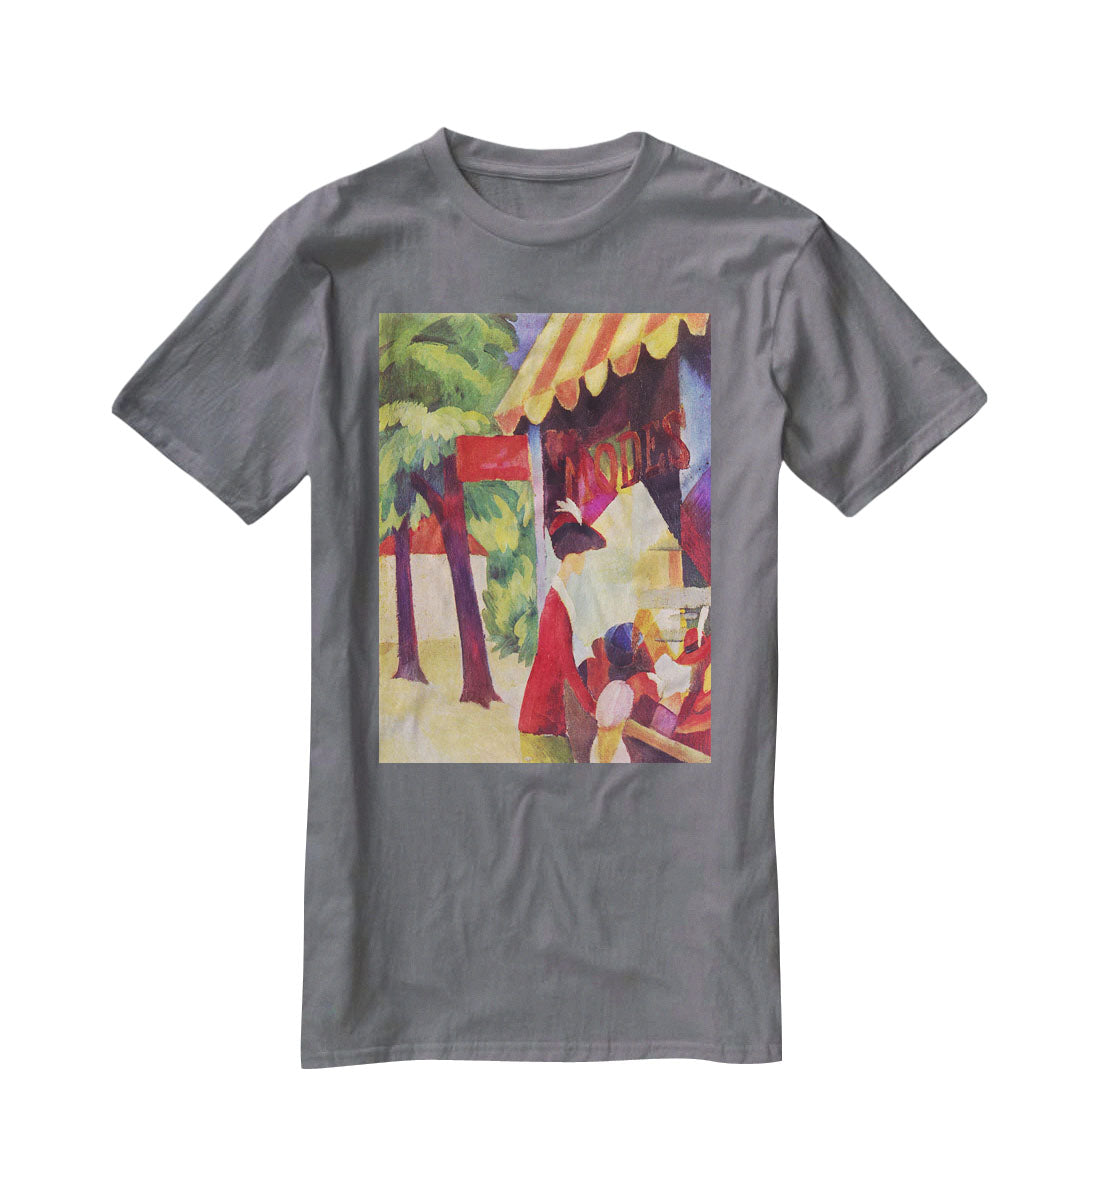 Before Hutladen woman with a red jacket and child by Macke T-Shirt - Canvas Art Rocks - 3